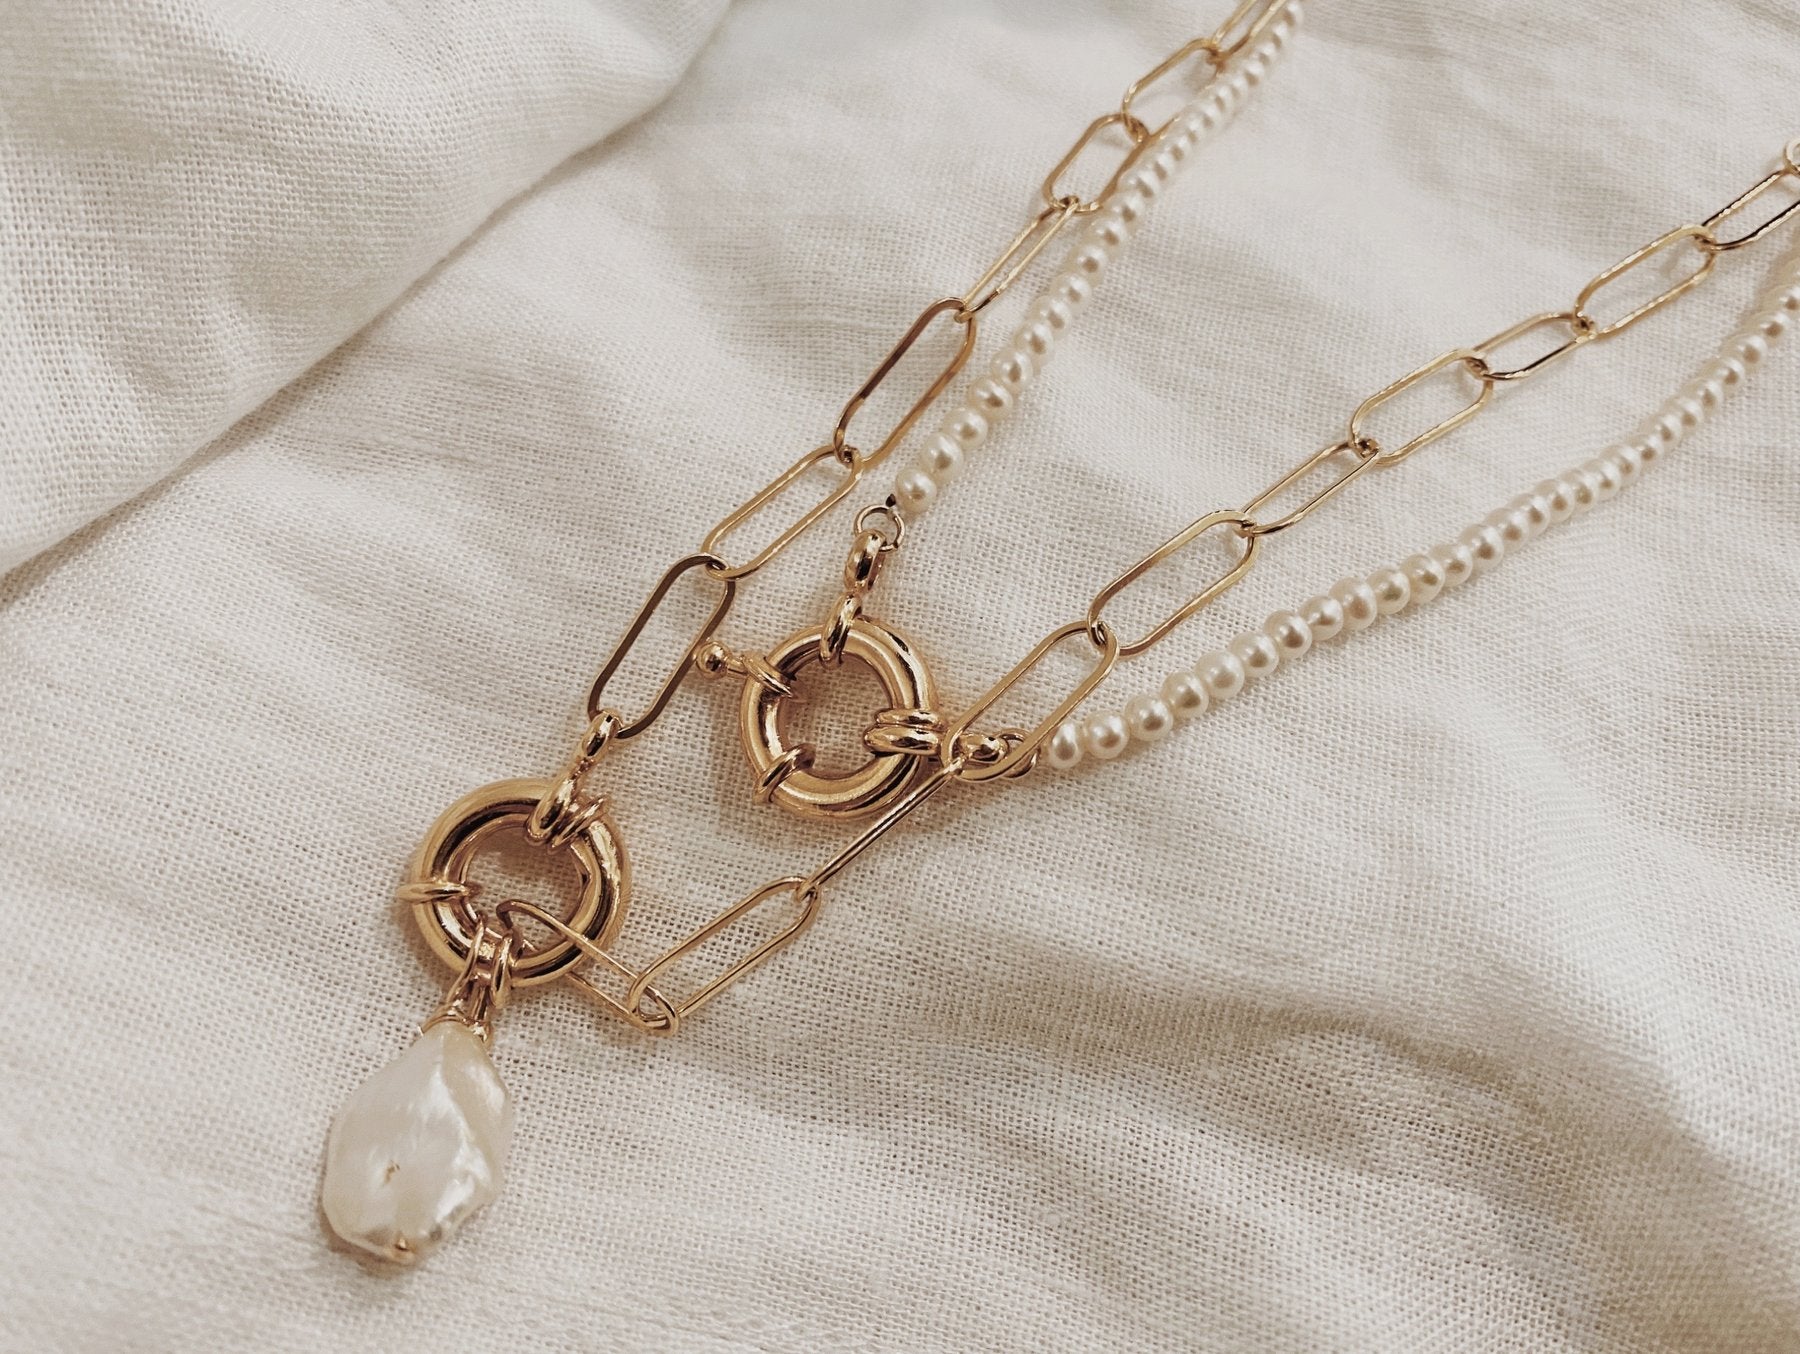 FINERRINGS - Elongated Spring Ring Necklace